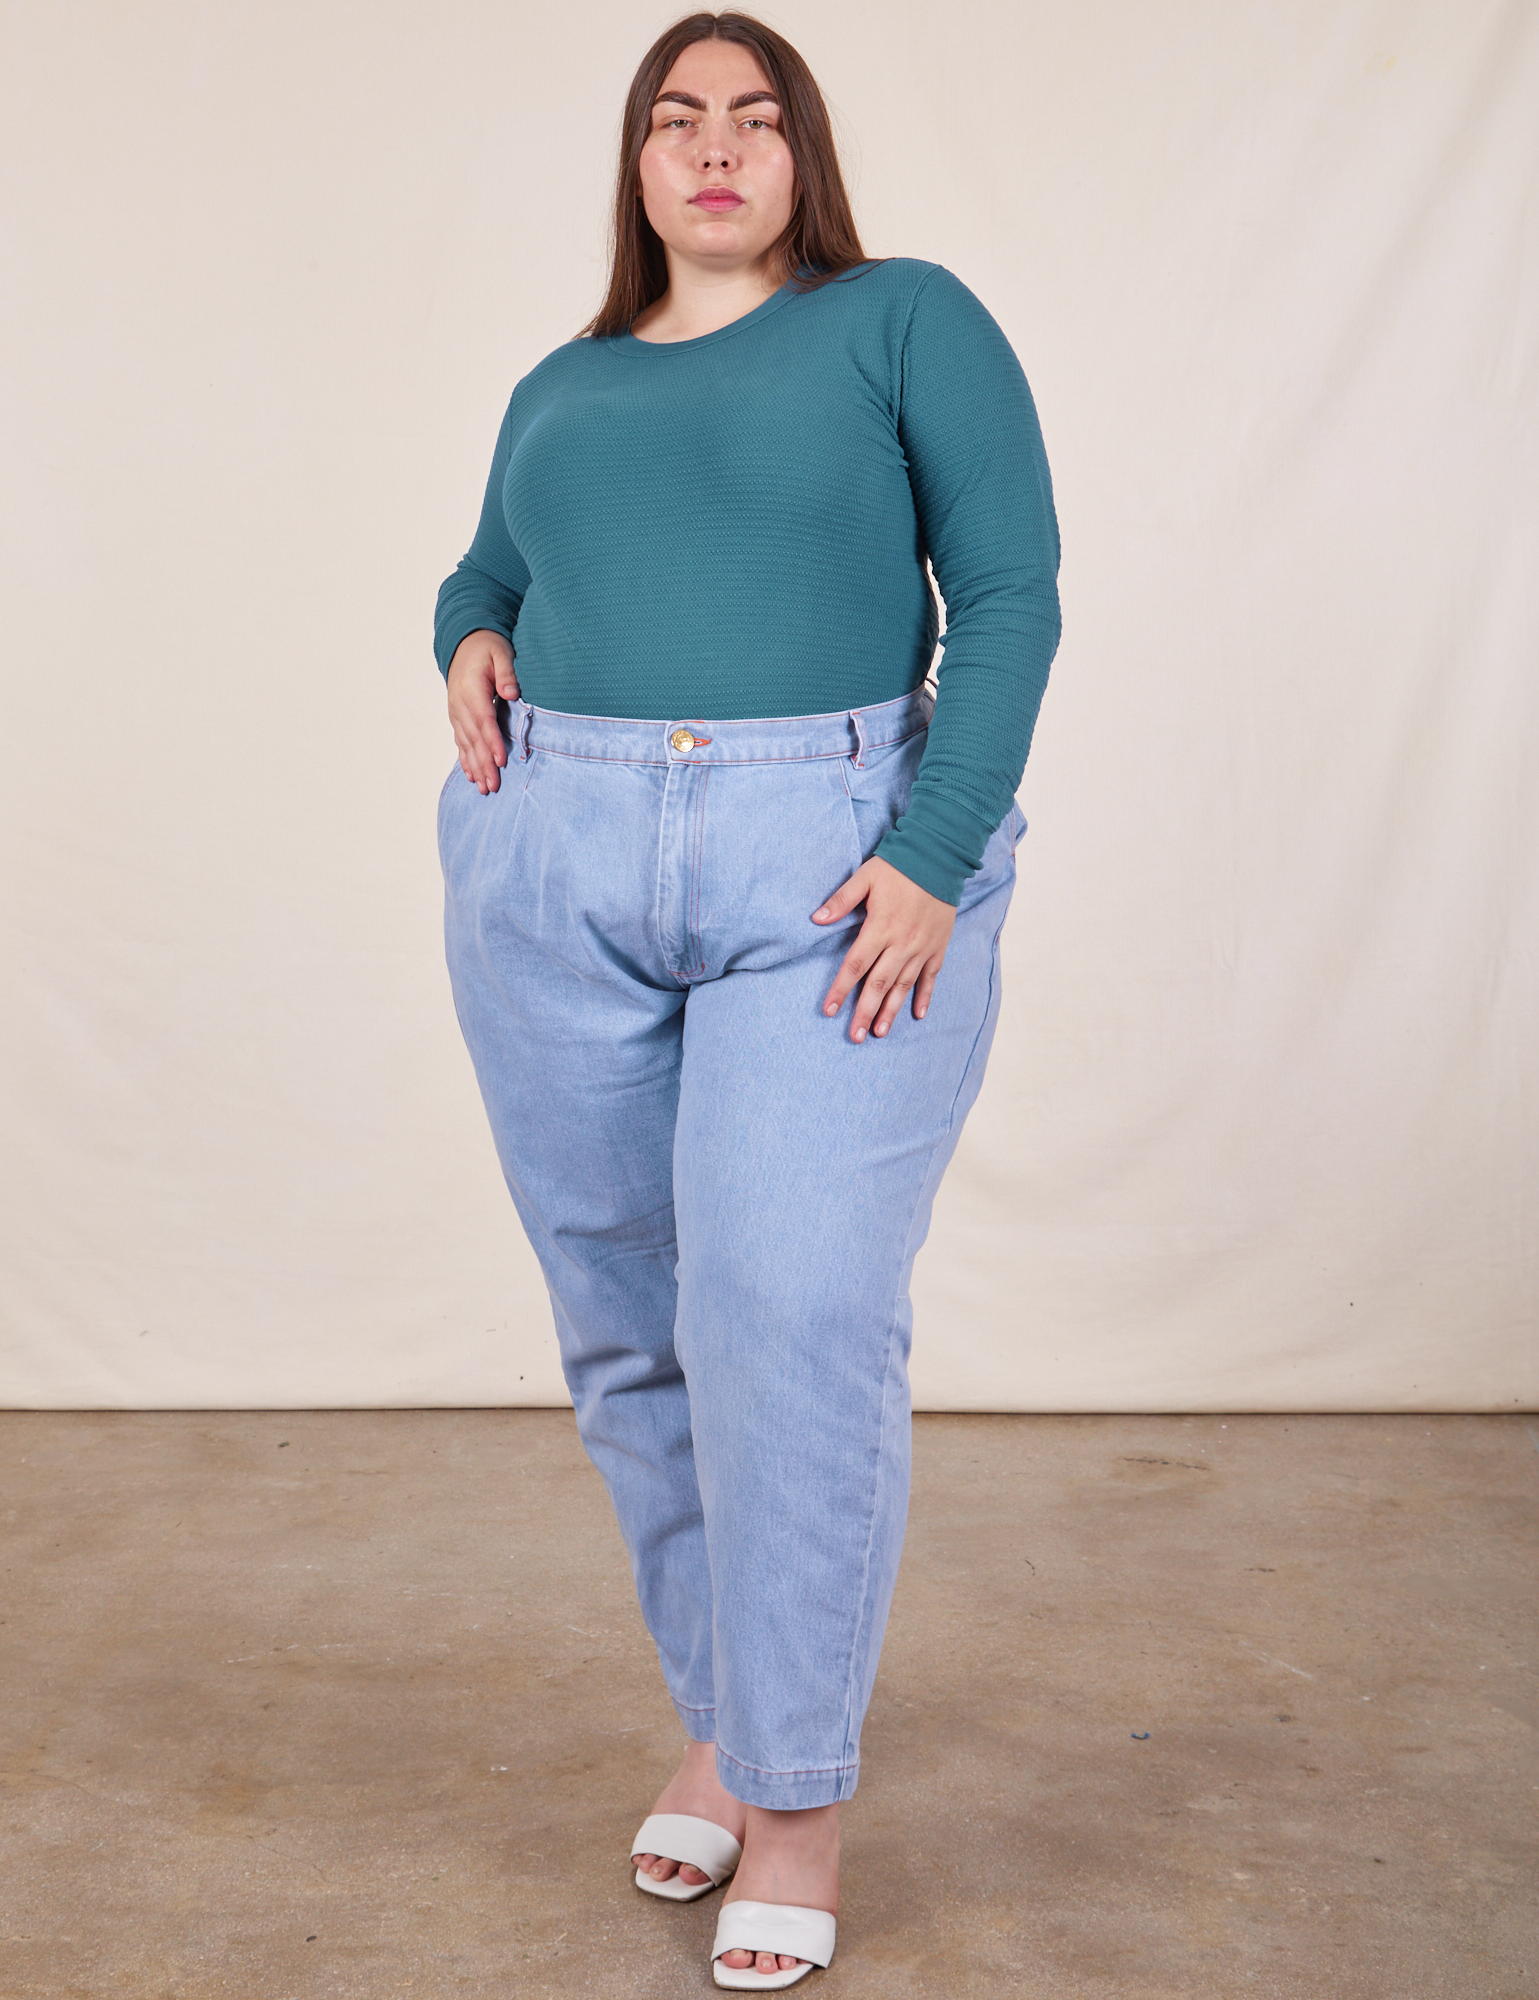 Marielena is wearing Honeycomb Thermal in Marine Blue tucked into light wash Denim Trousers